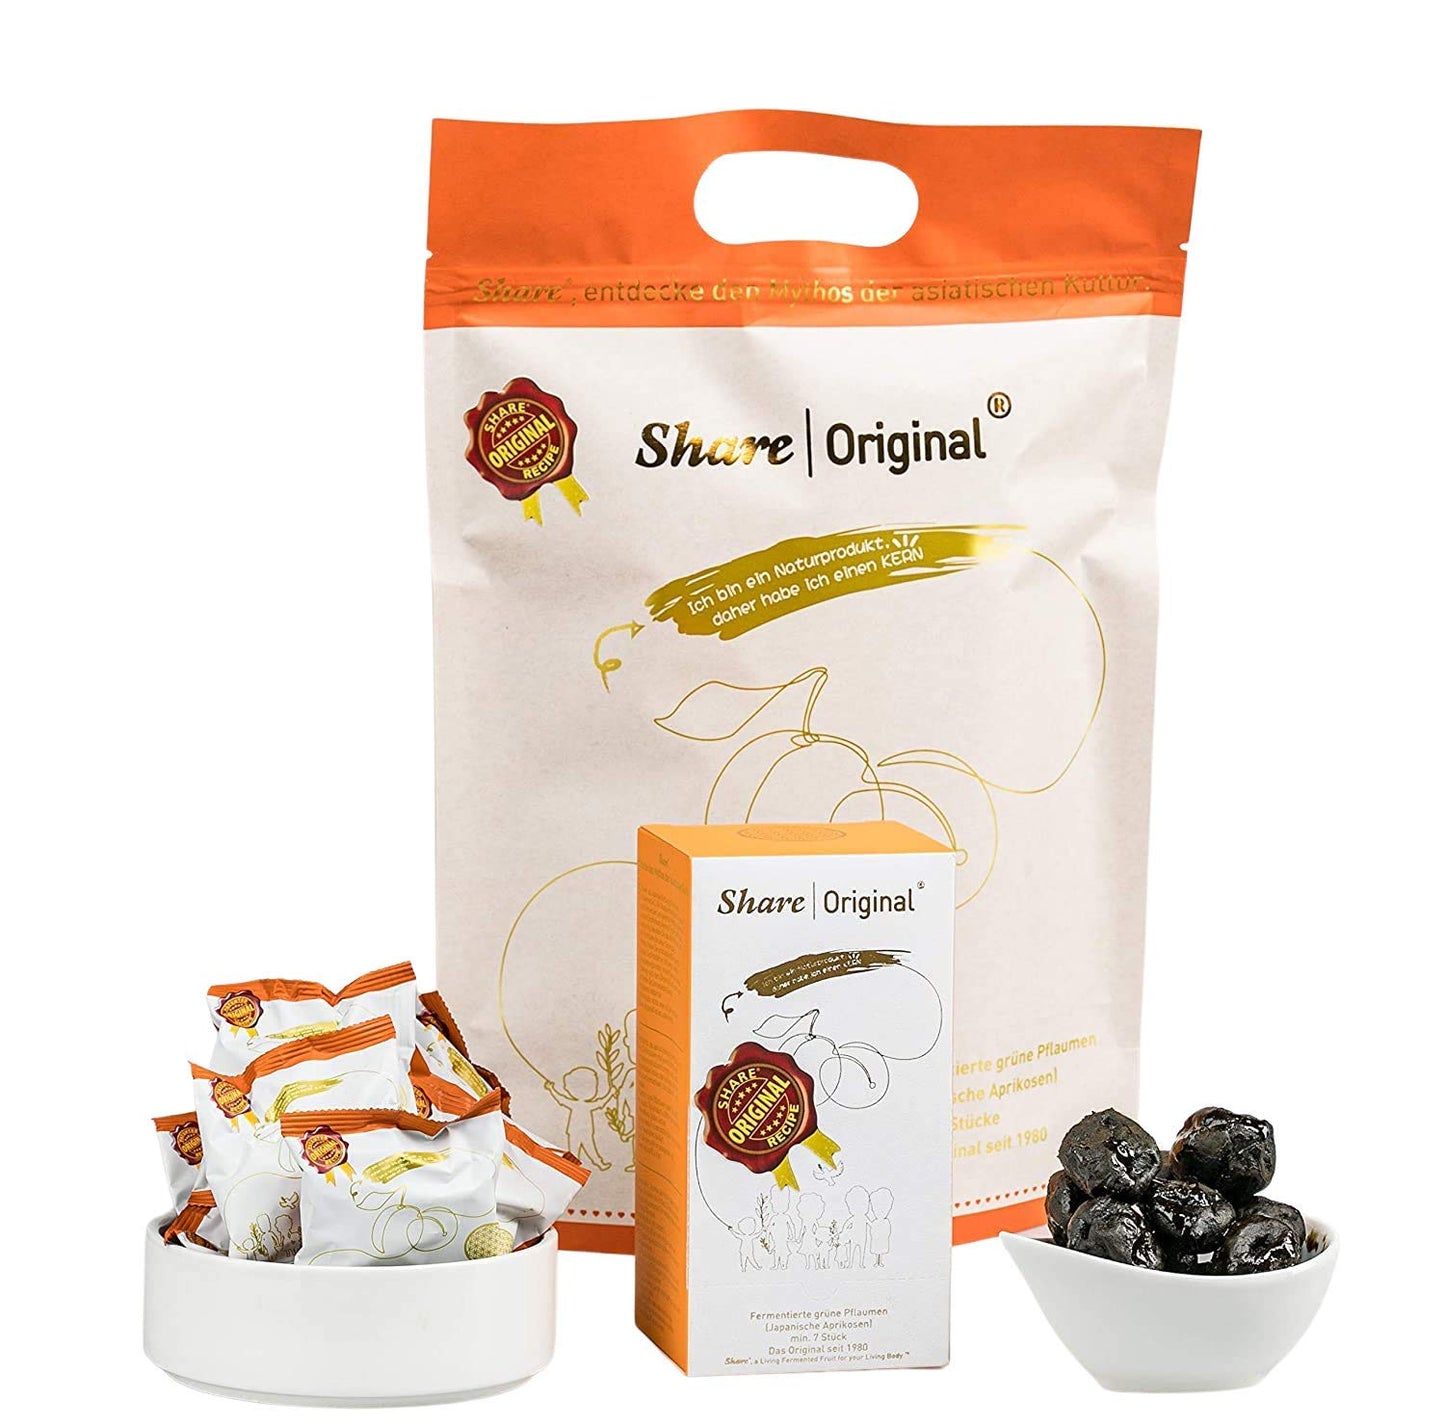 Share Original® (Organza Bag, 33-pc): 30+month naturally fermented Japanese apricot/plum, effective natural alternative to lab-made laxatives & probiotics, vegan & non-GMO, individually wrapped packet easy to travel (made in Switzerland, free shipping)